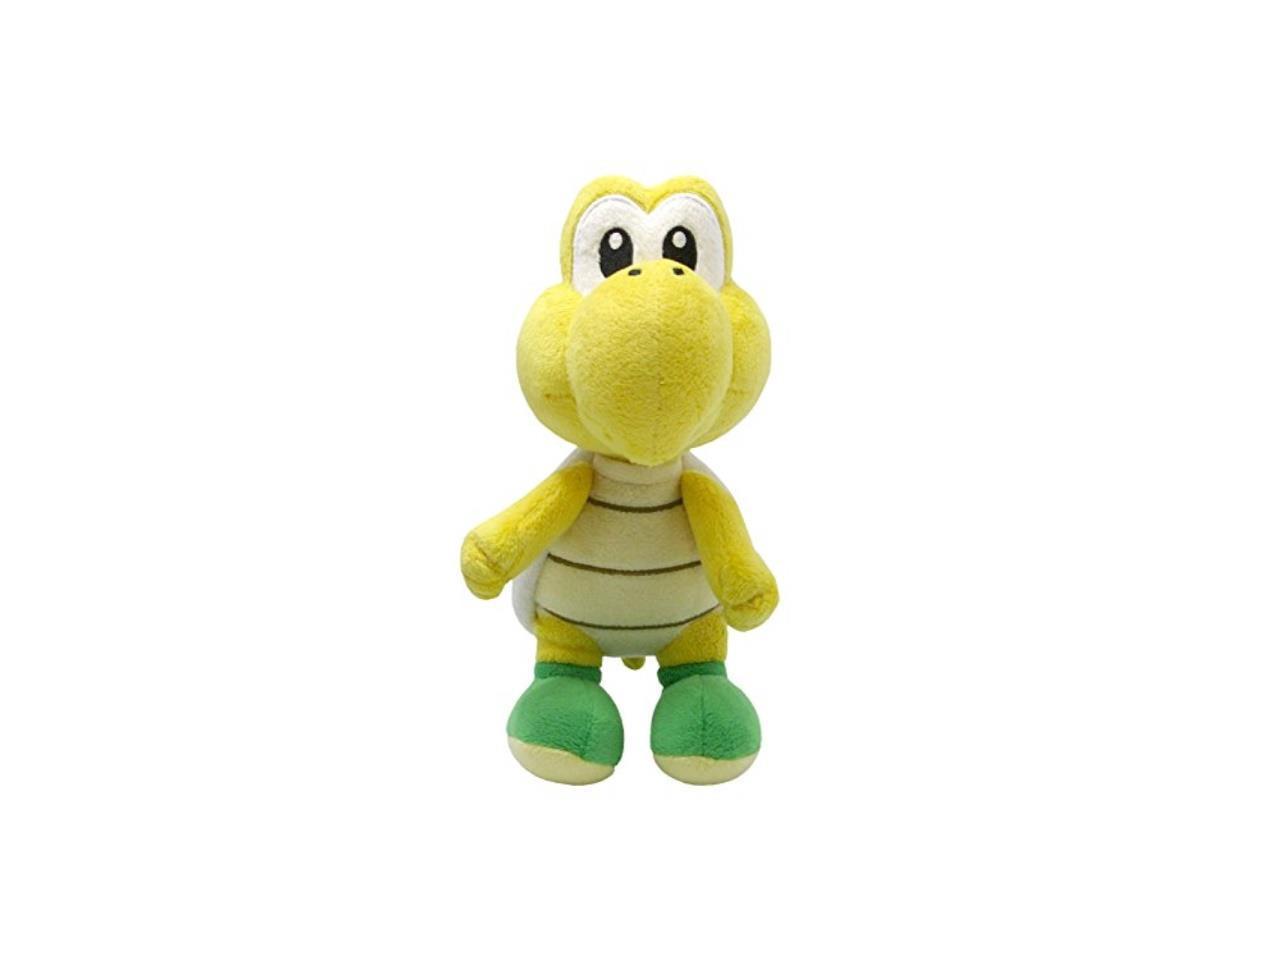 Sanei Super Mario All Star Collection AC22 Koopa Paratroopa 7.5" Plush 